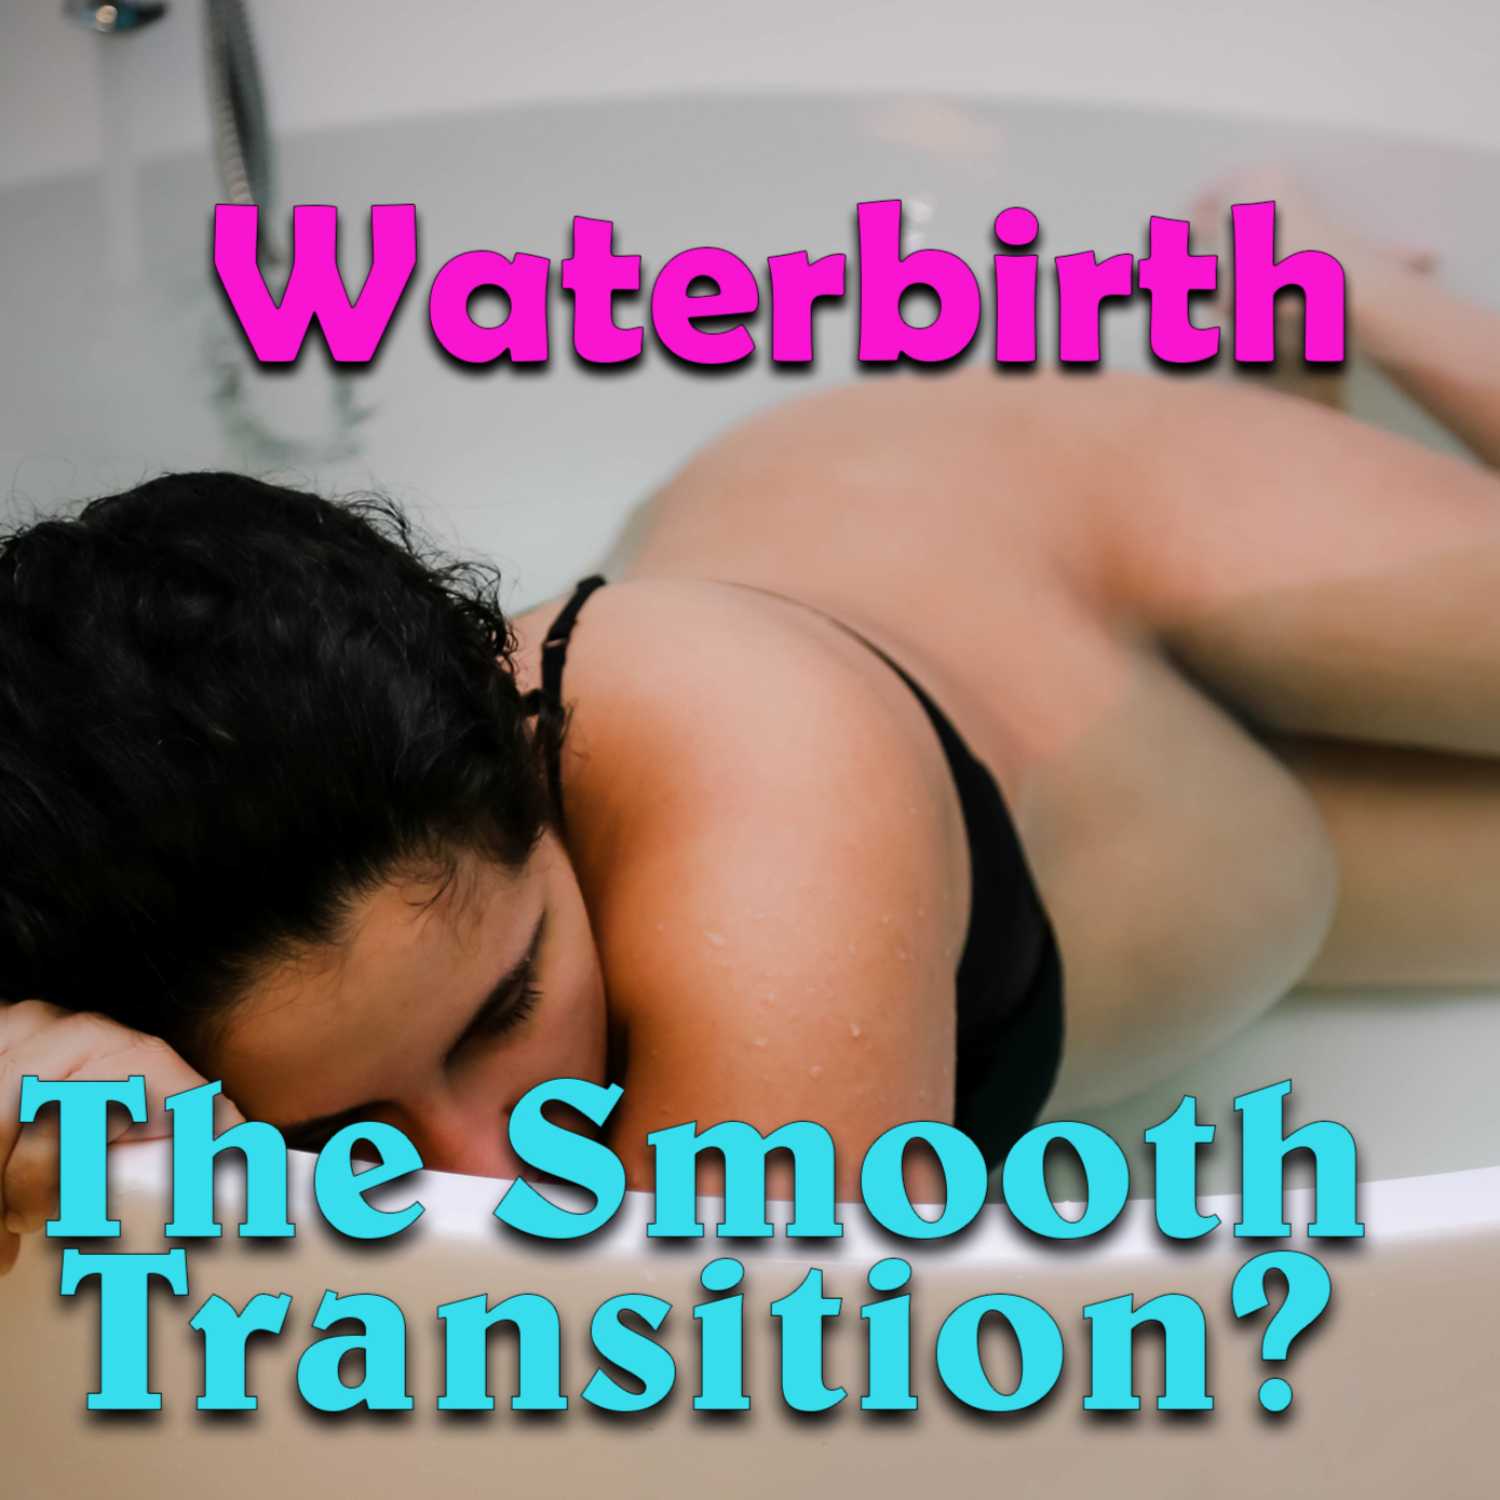 Waterbirth, the Smooth Transition: Everything about the process, risks, advantages, and disadvantages